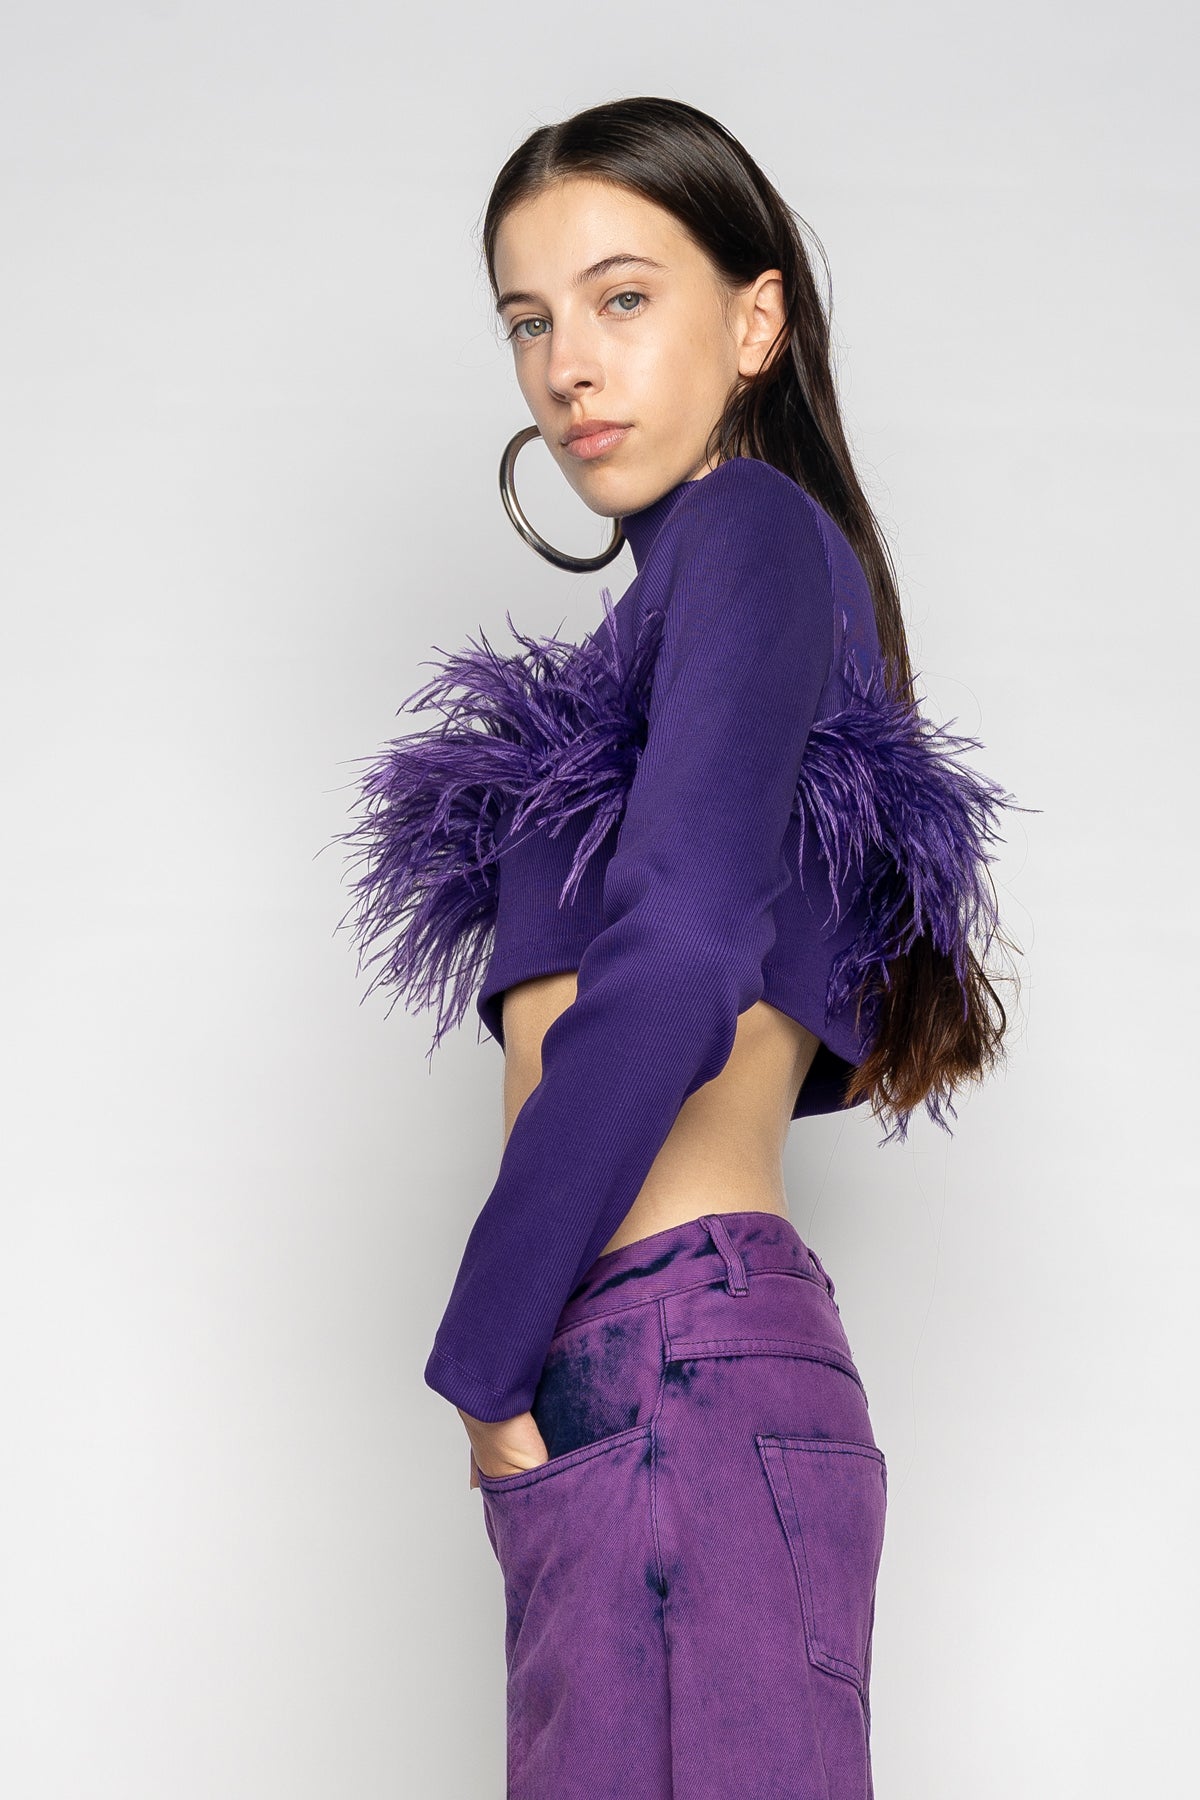 PURPLE CROPPED FEATHER TOP marques almeida